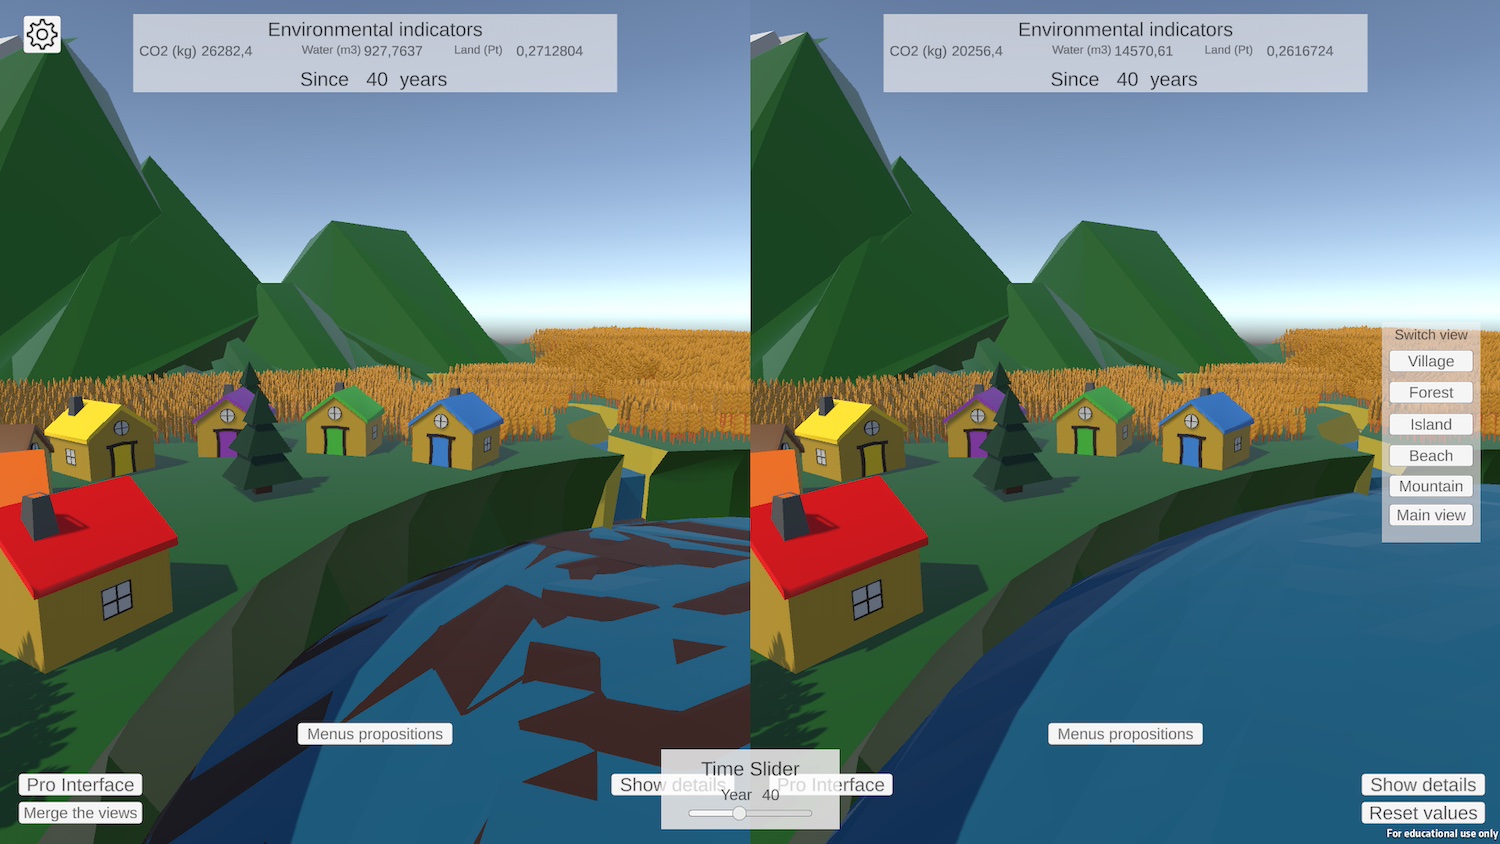 Dana, comparison of two menus consuming different amounts of fresh water. In the world on the left, no more fresh water is available. In the world on the right, freshwater levels are dropping, but there's still water available.